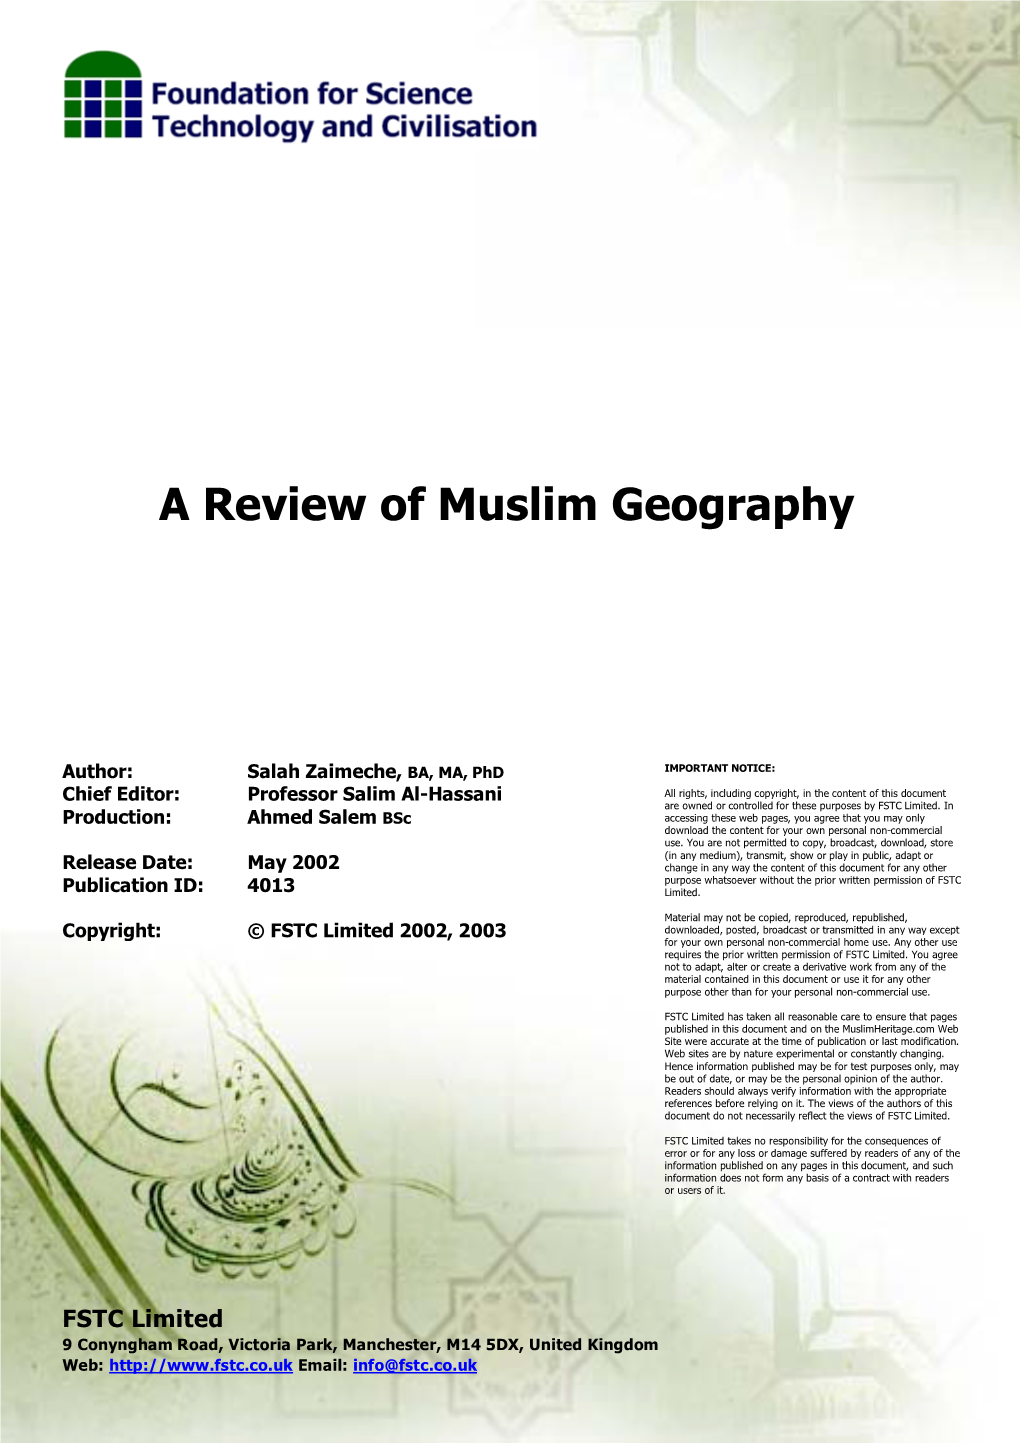 A Review of Muslim Geography